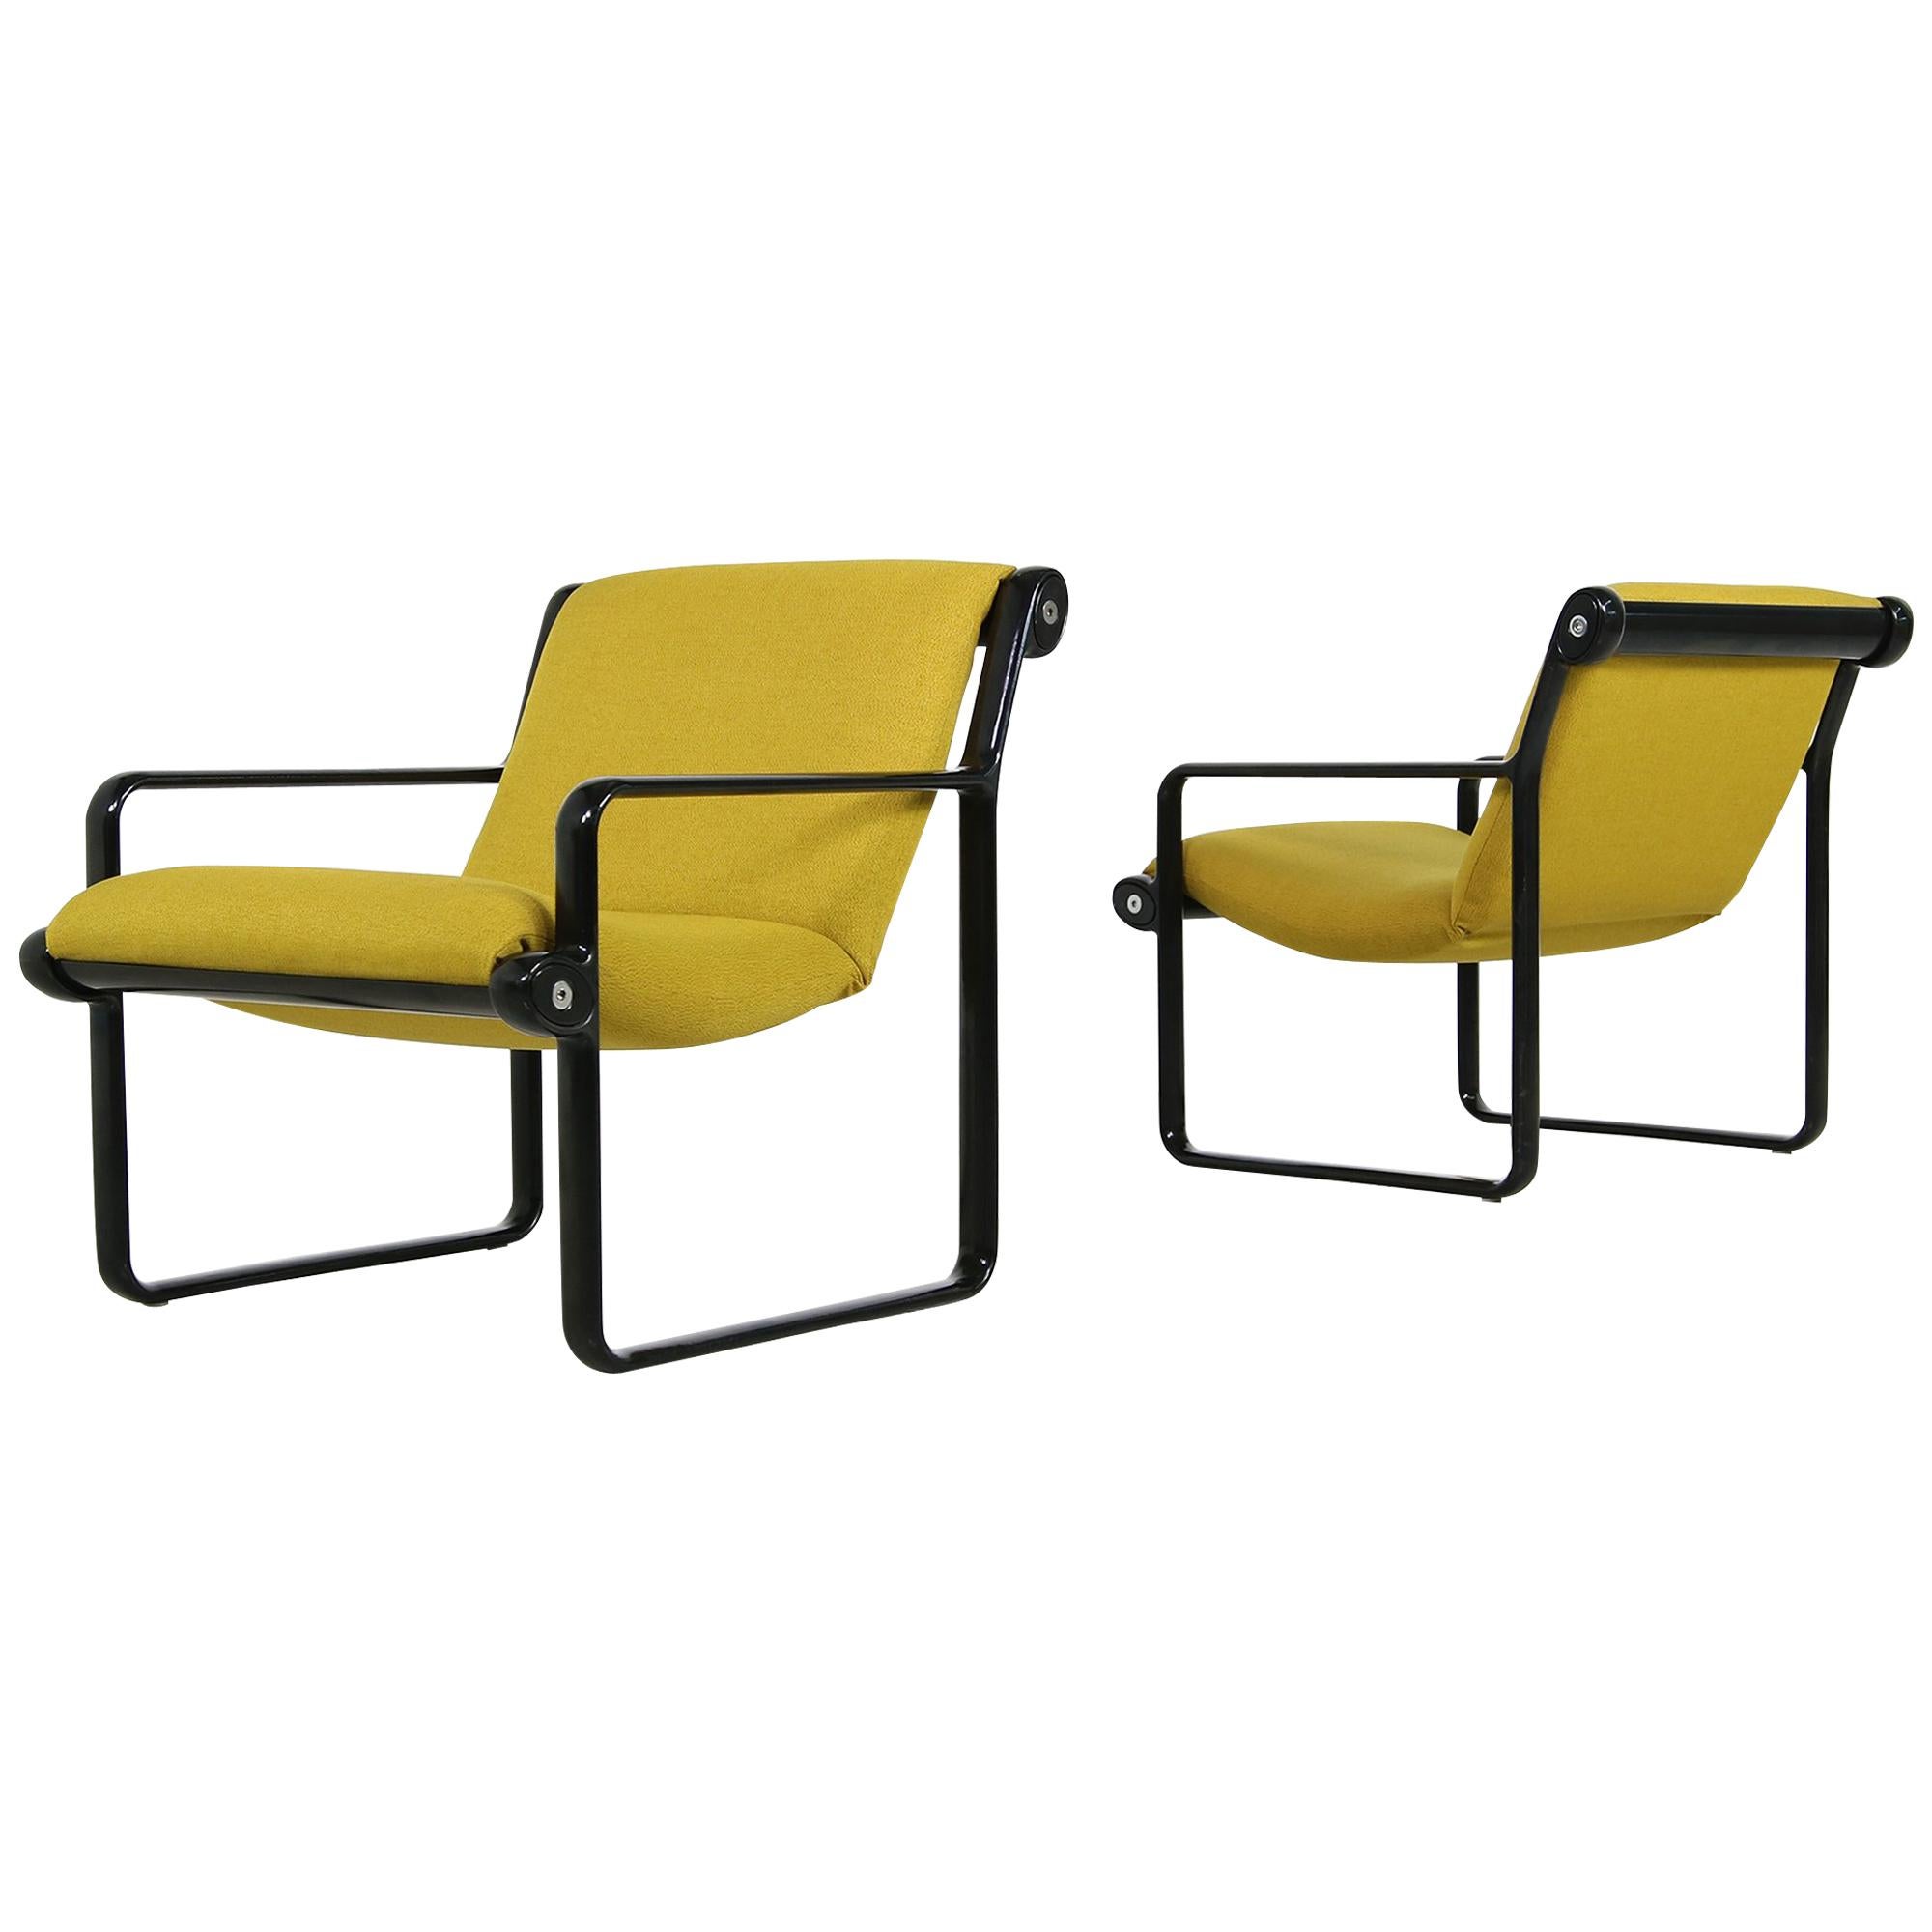 Pair of 1970s Lounge Chairs by Hannah & Morrison for Knoll Dark Yellow & Black For Sale